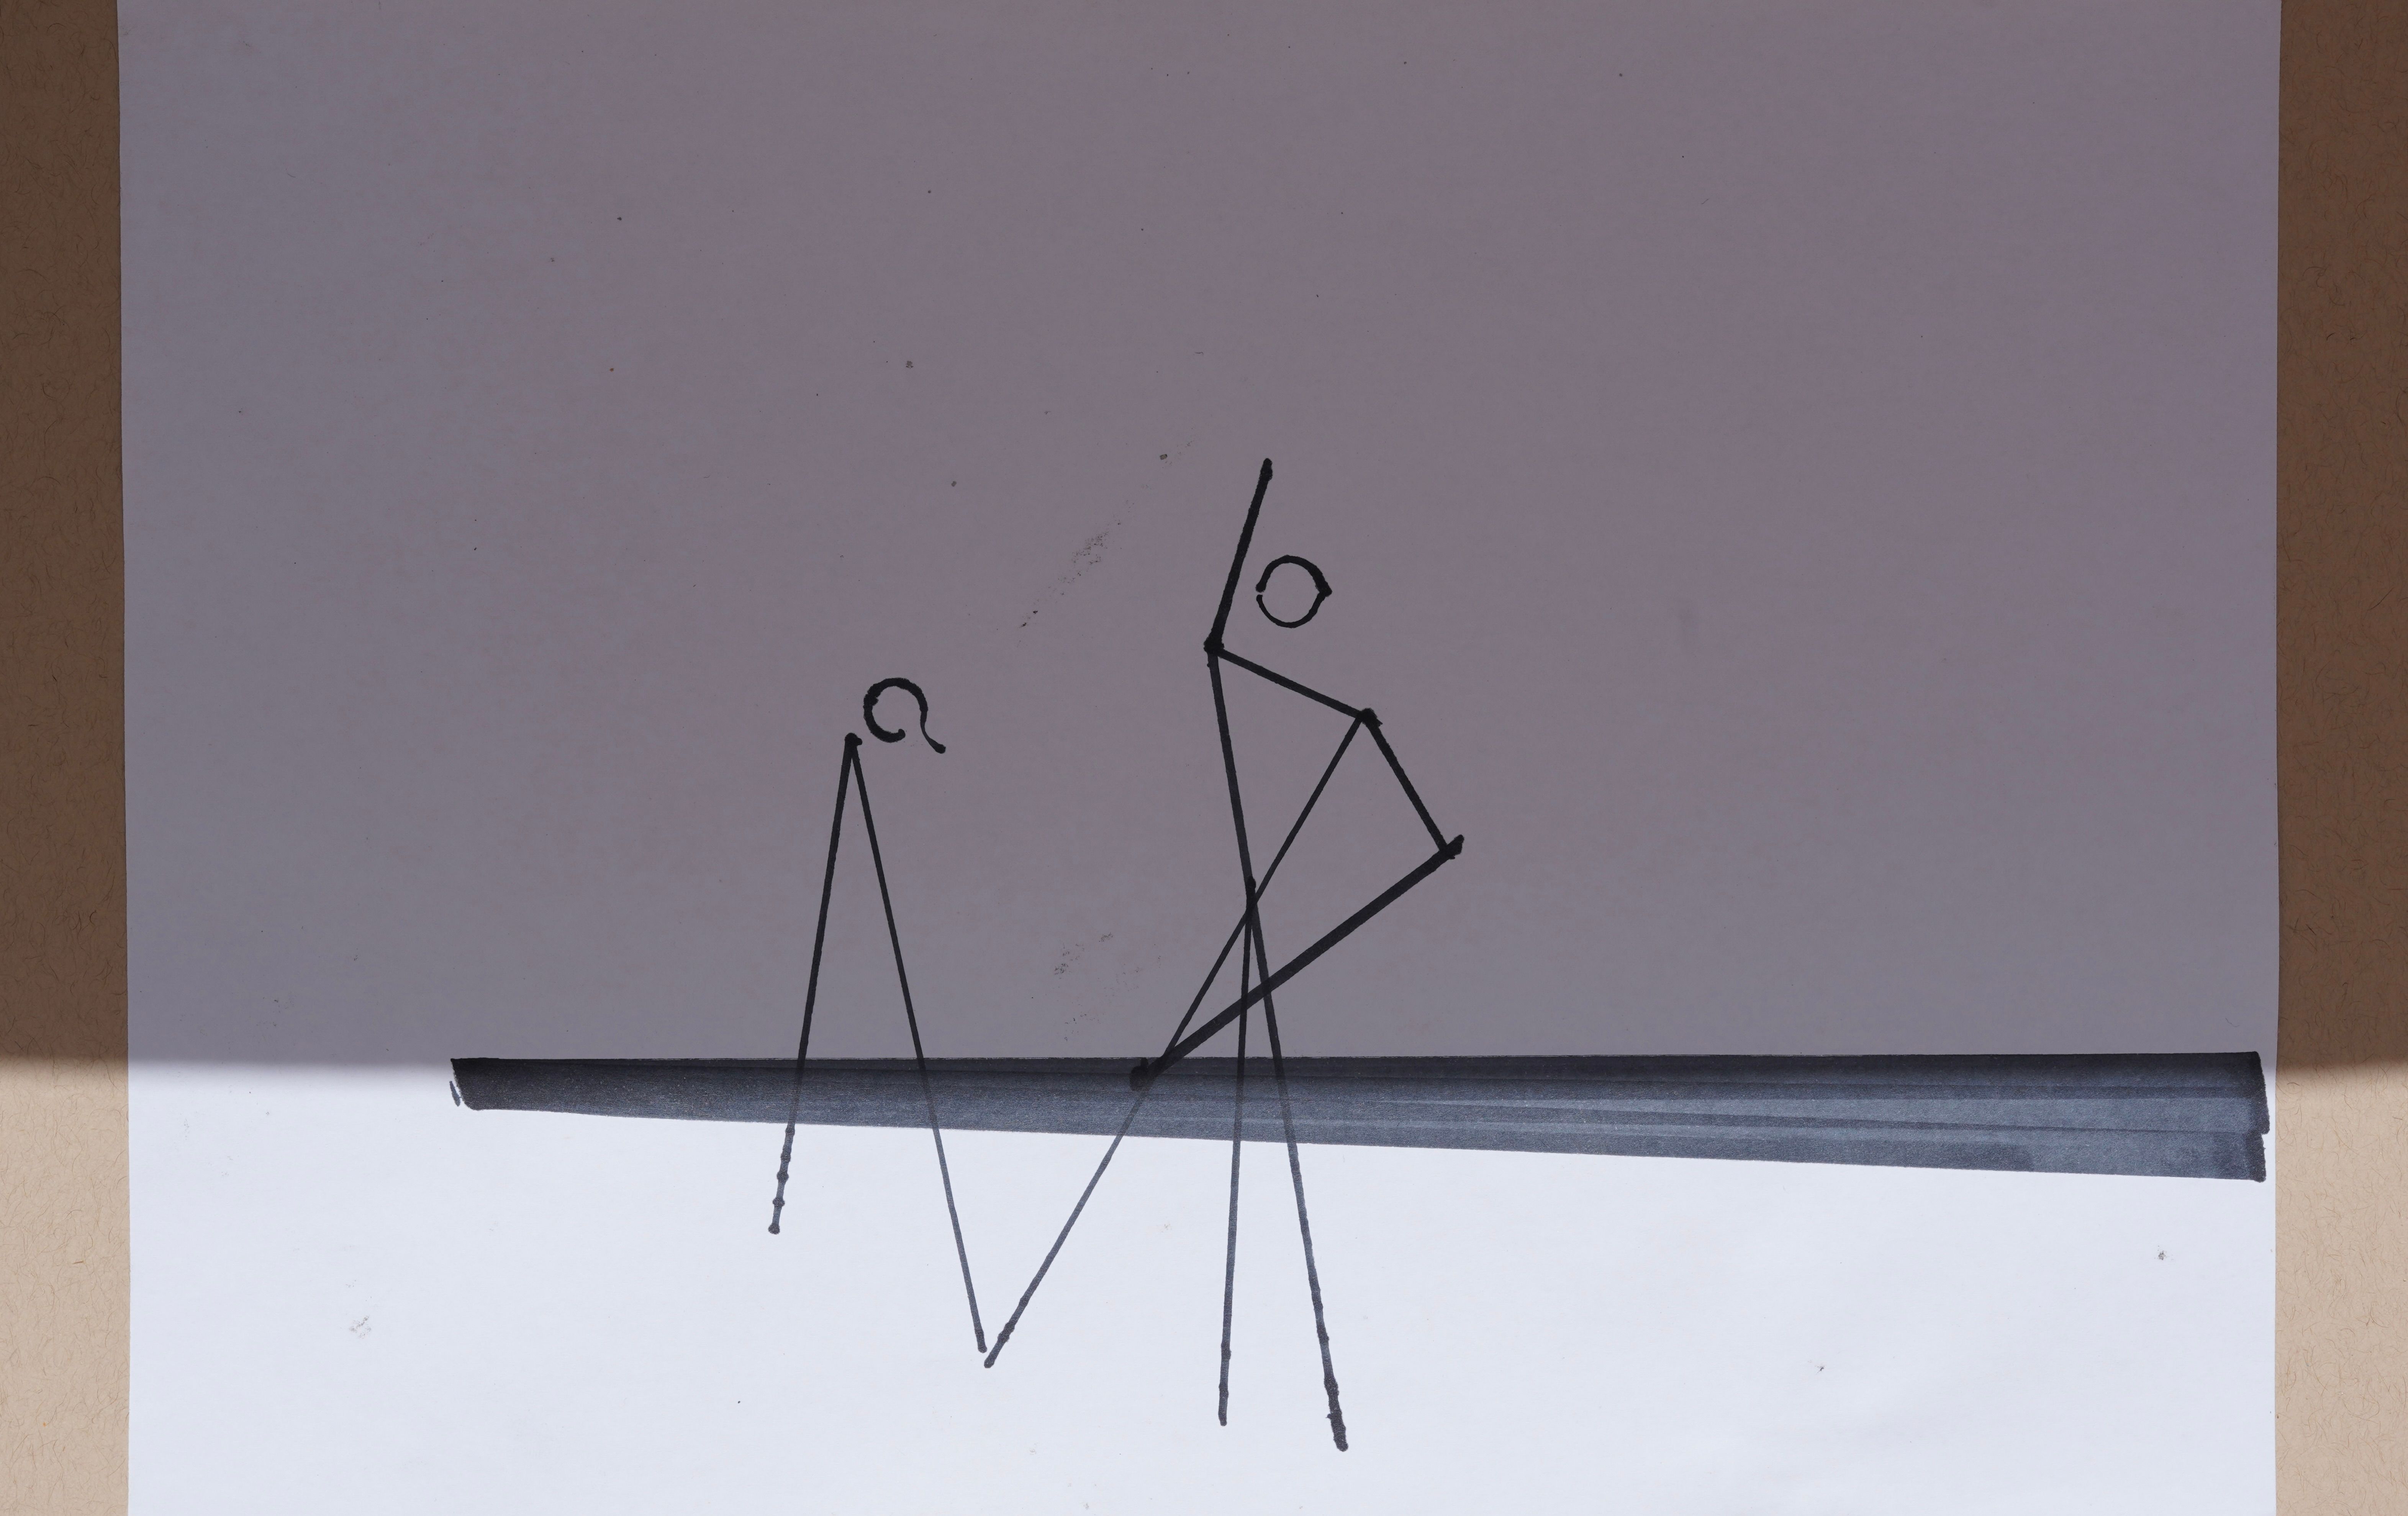 Rafal Bujnowski, Shadow on Paper, 2022, detail of ink on paper and digital image on a screen, 29.7 x 21 cm (11 5/8 x 8 1/4 in.) (each drawing), overall dimensions variable 